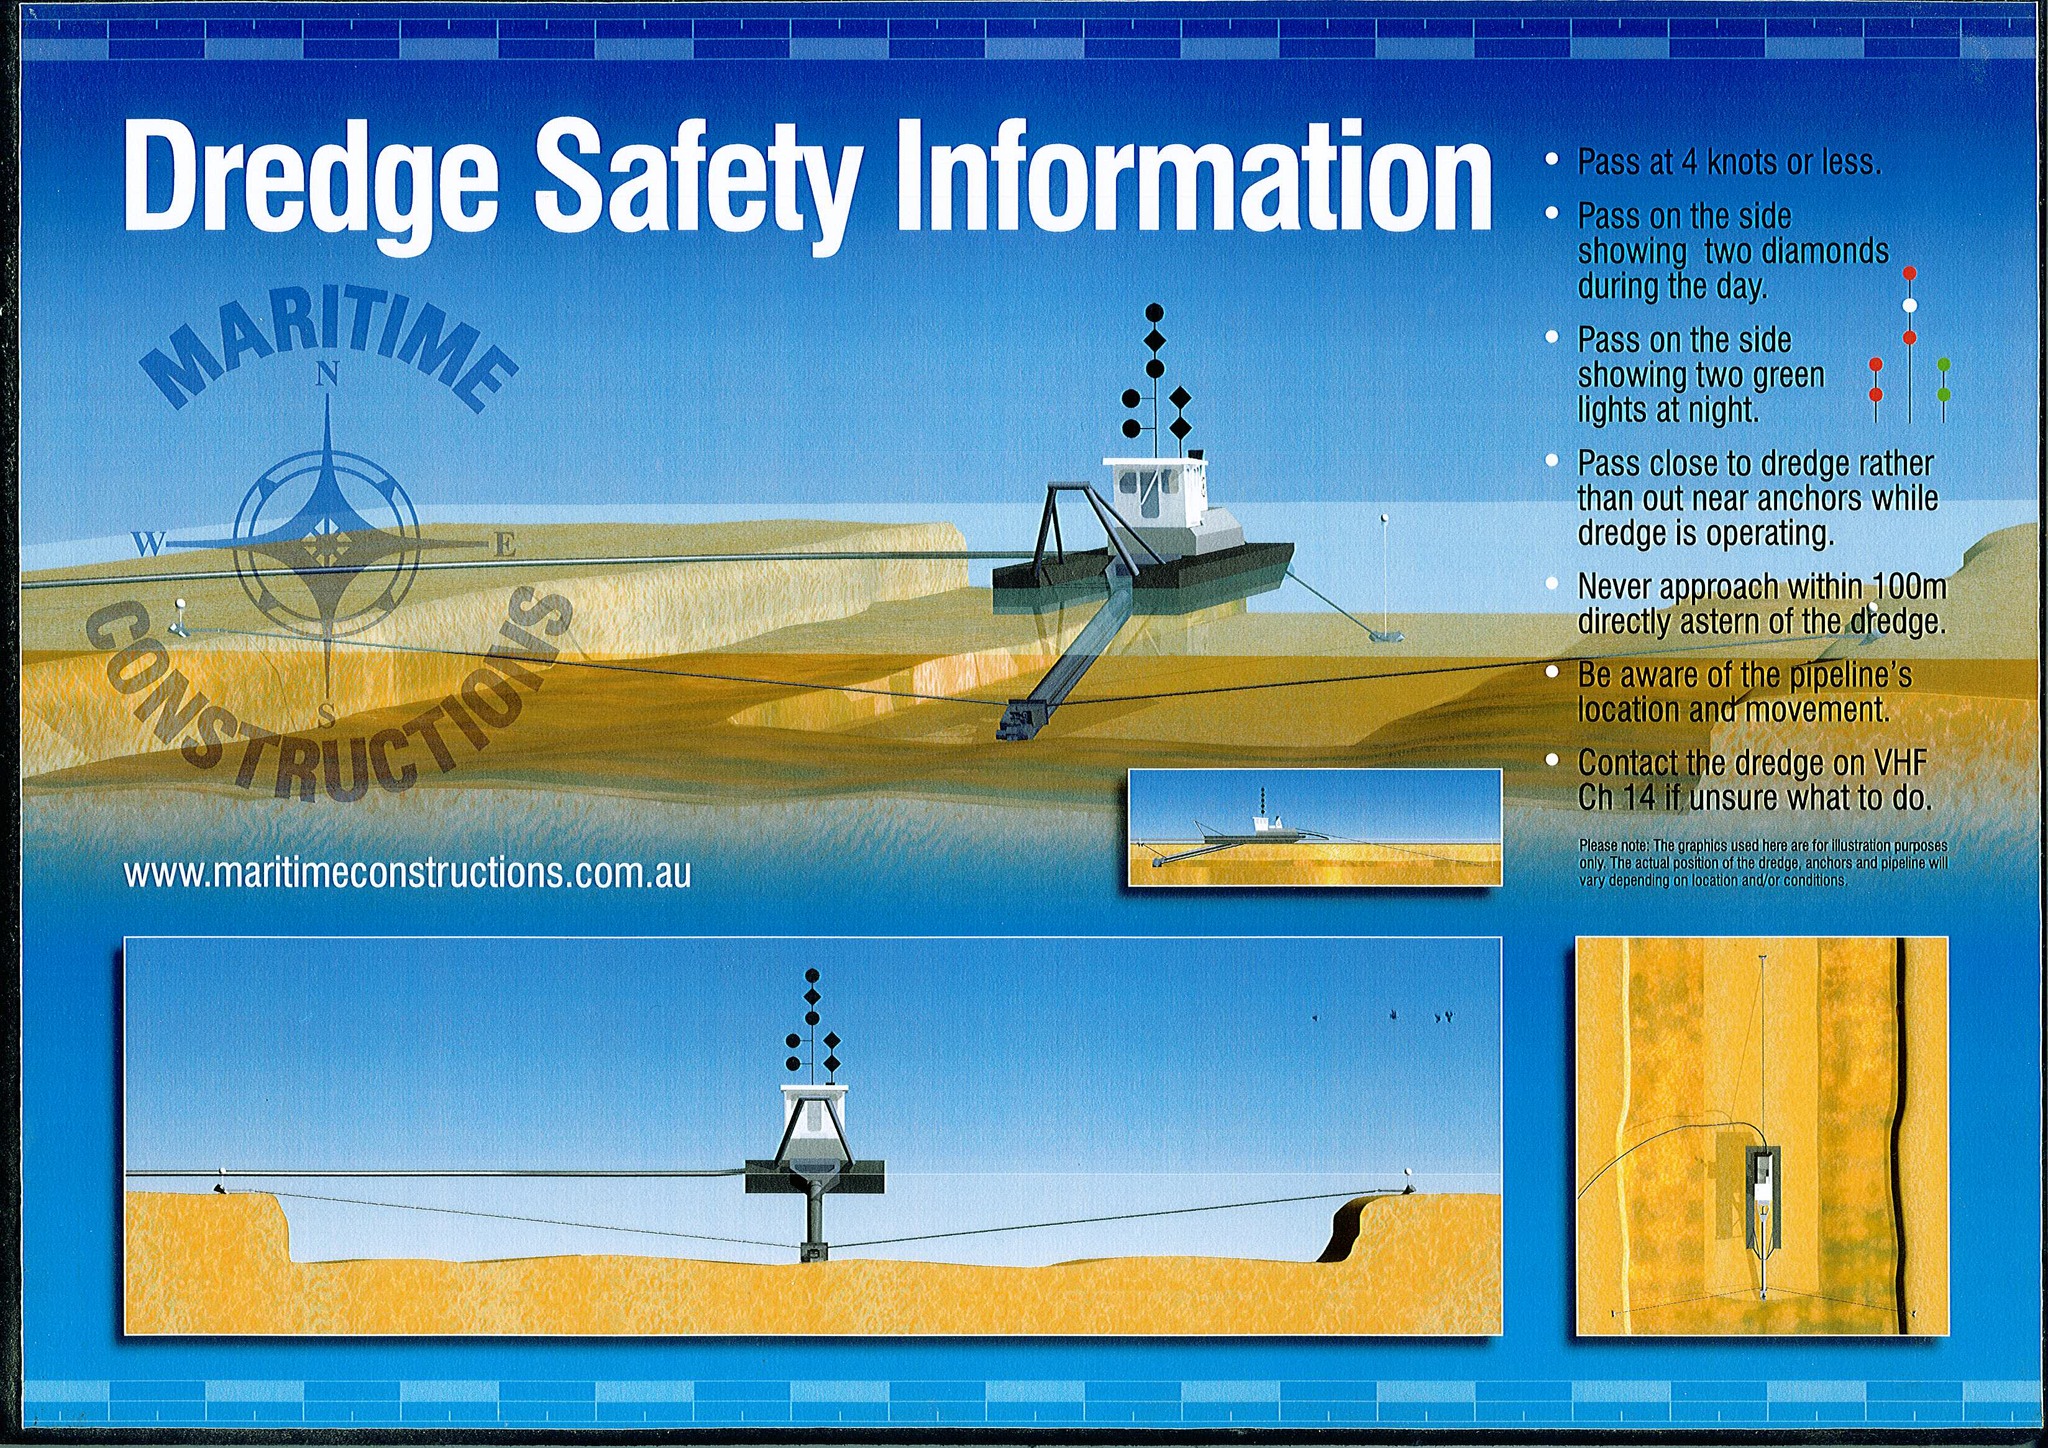 Dredge Safety Information - Maritime Constructions